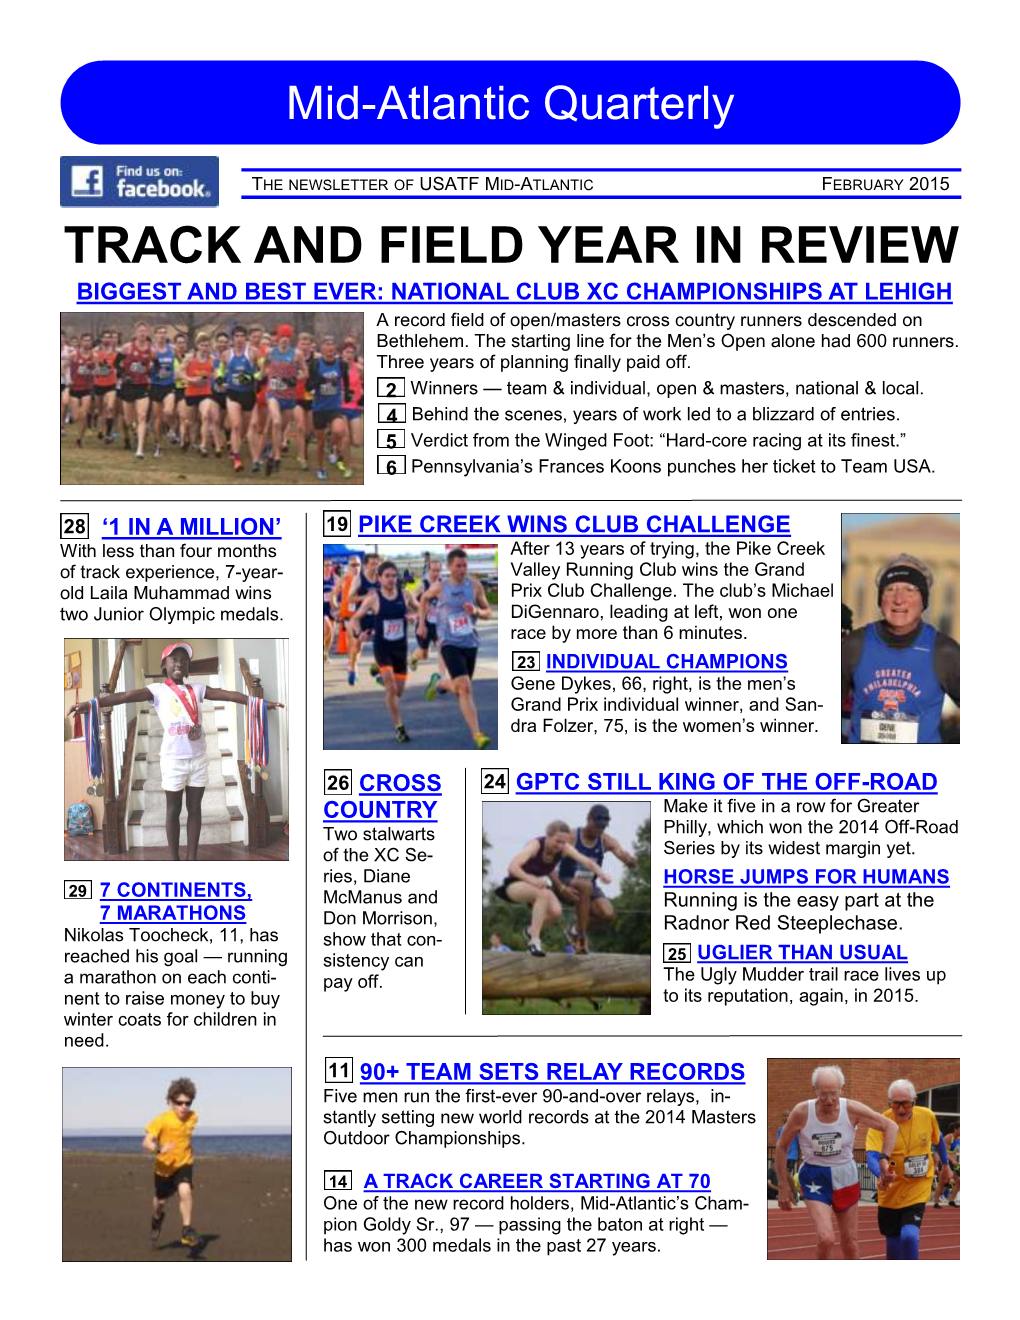 Track and Field Year in Review